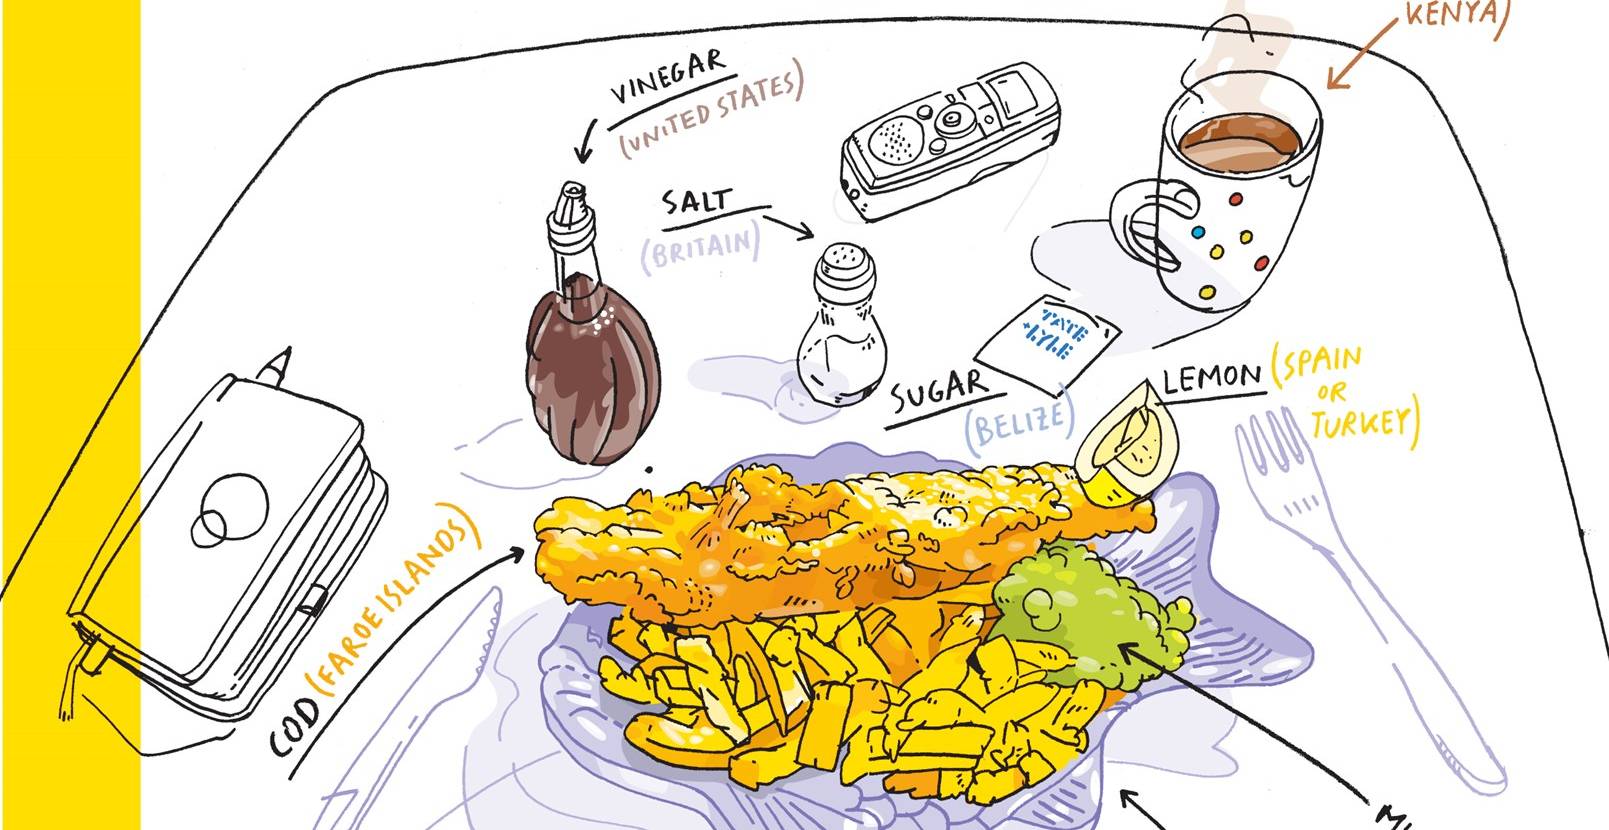 Colour illustration of a plate of fish and chips with condiments labelled with their place of origin, such as cod from the Faroe Islands, vinegar from the United States and lemon from Spain or Turkey